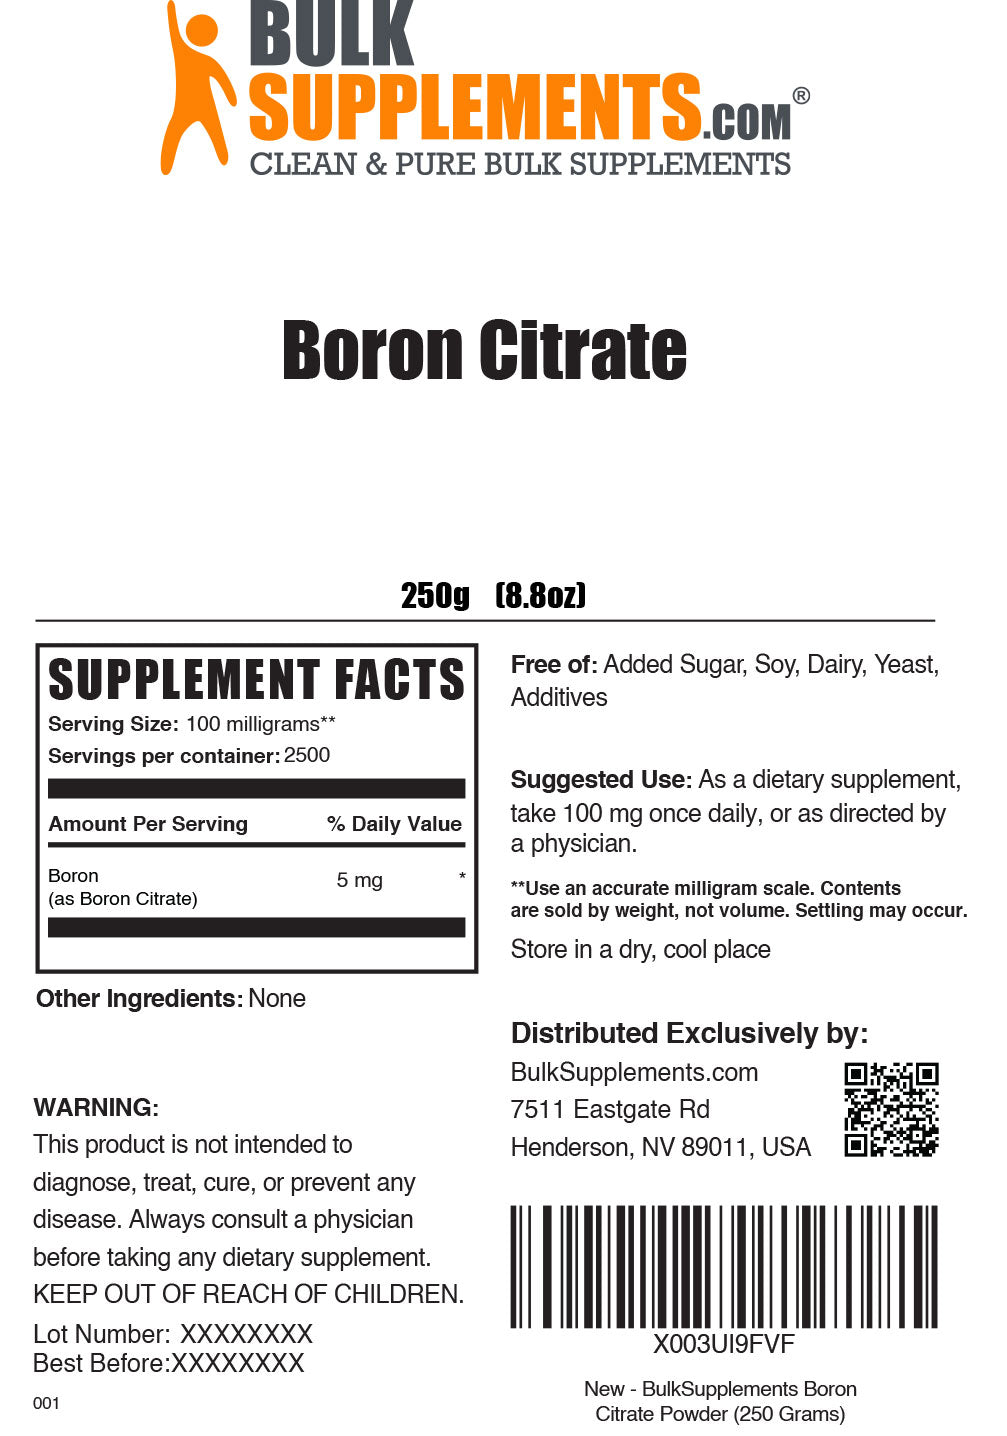 250g of Boron Citrate Supplement Facts